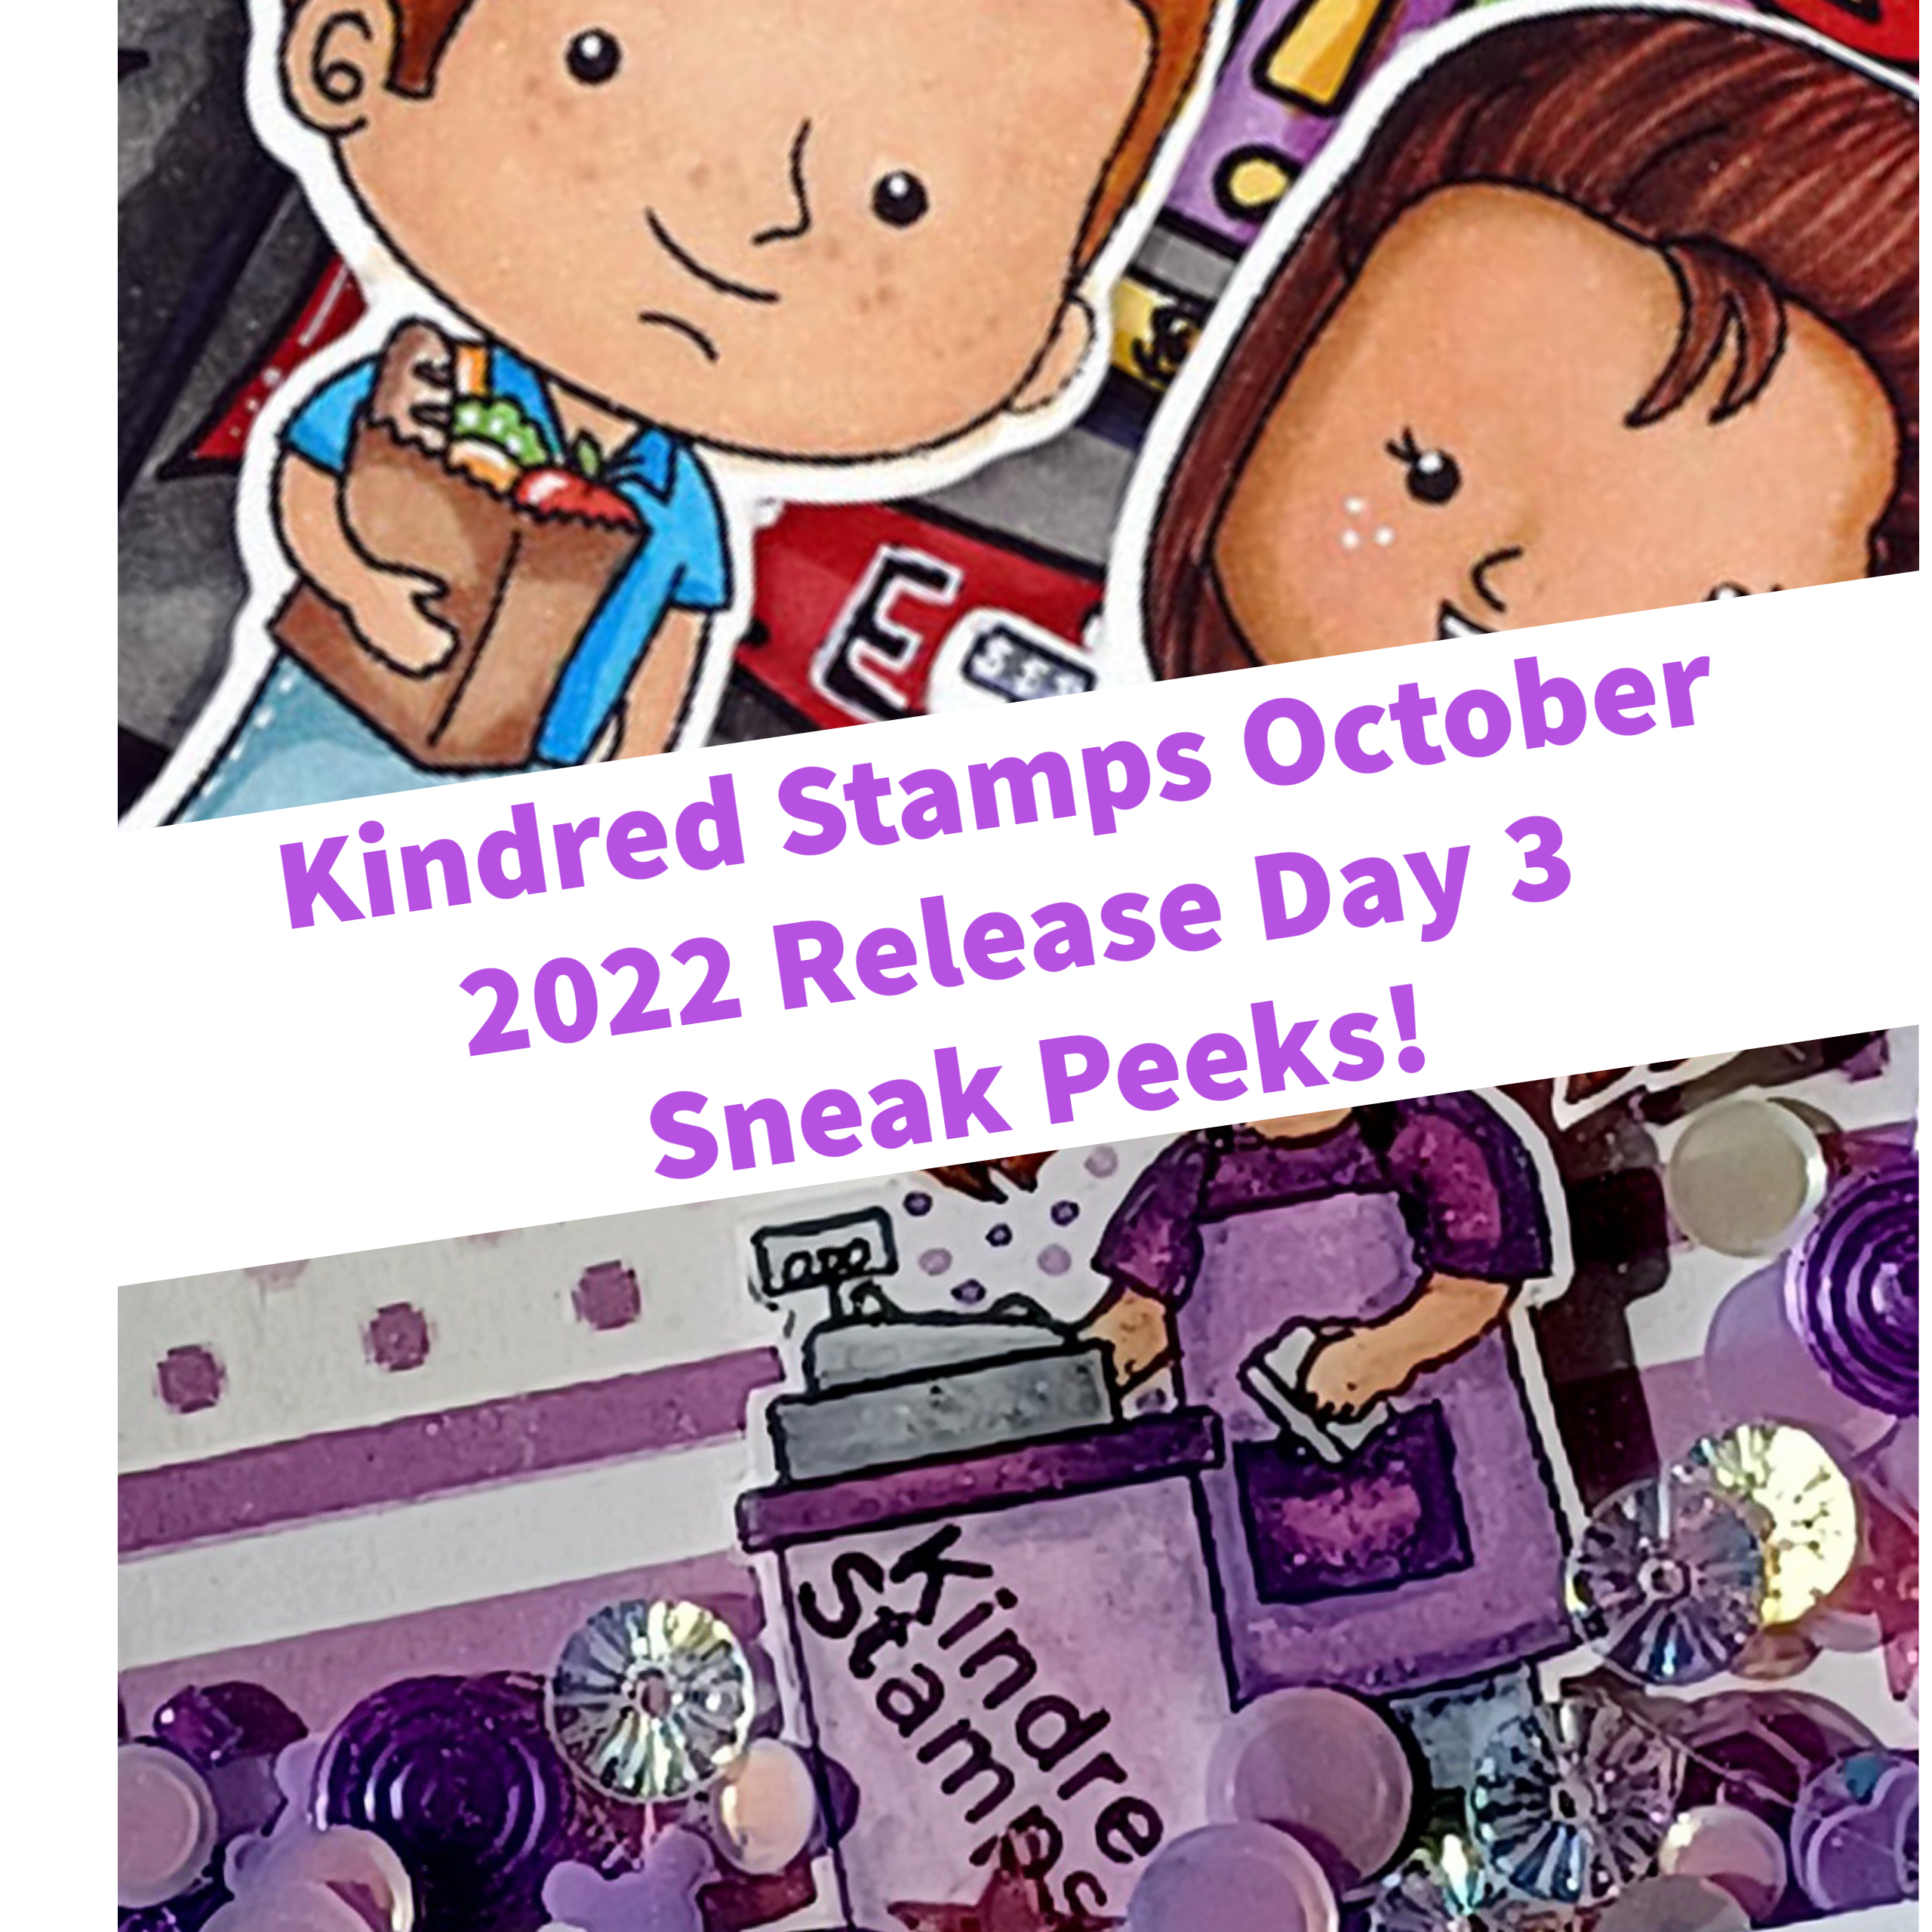 October Release Day 3: Career Day Series-Retail Workers